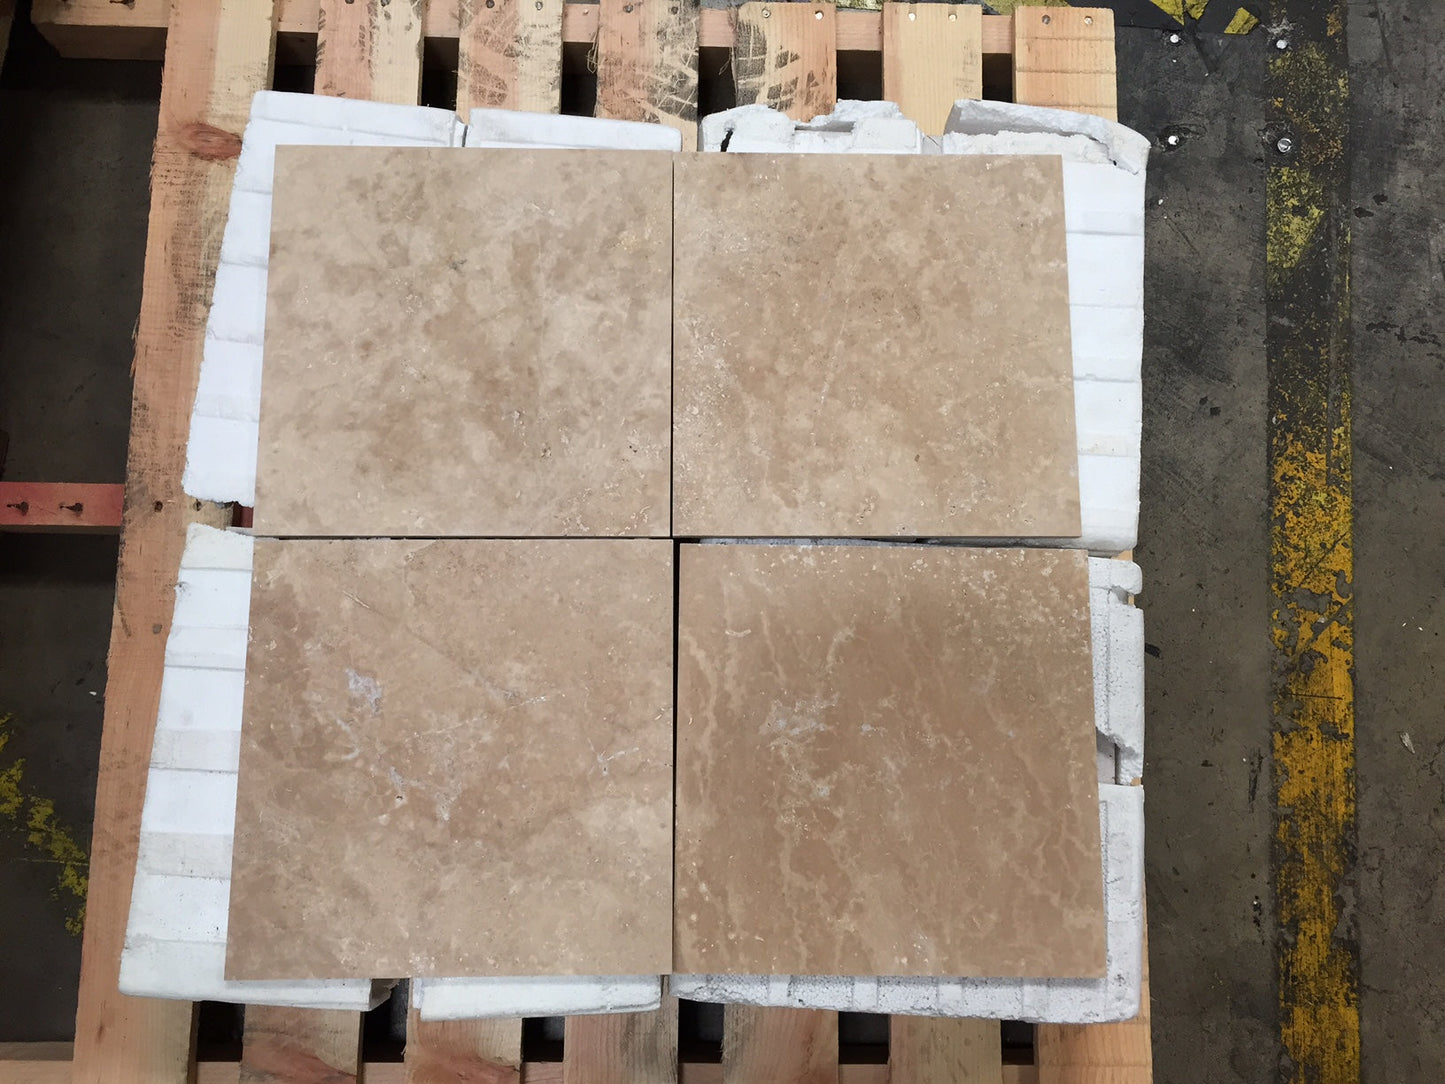 Walnut Travertine Filled & Honed Premium Wall and Floor Tile 12x12"